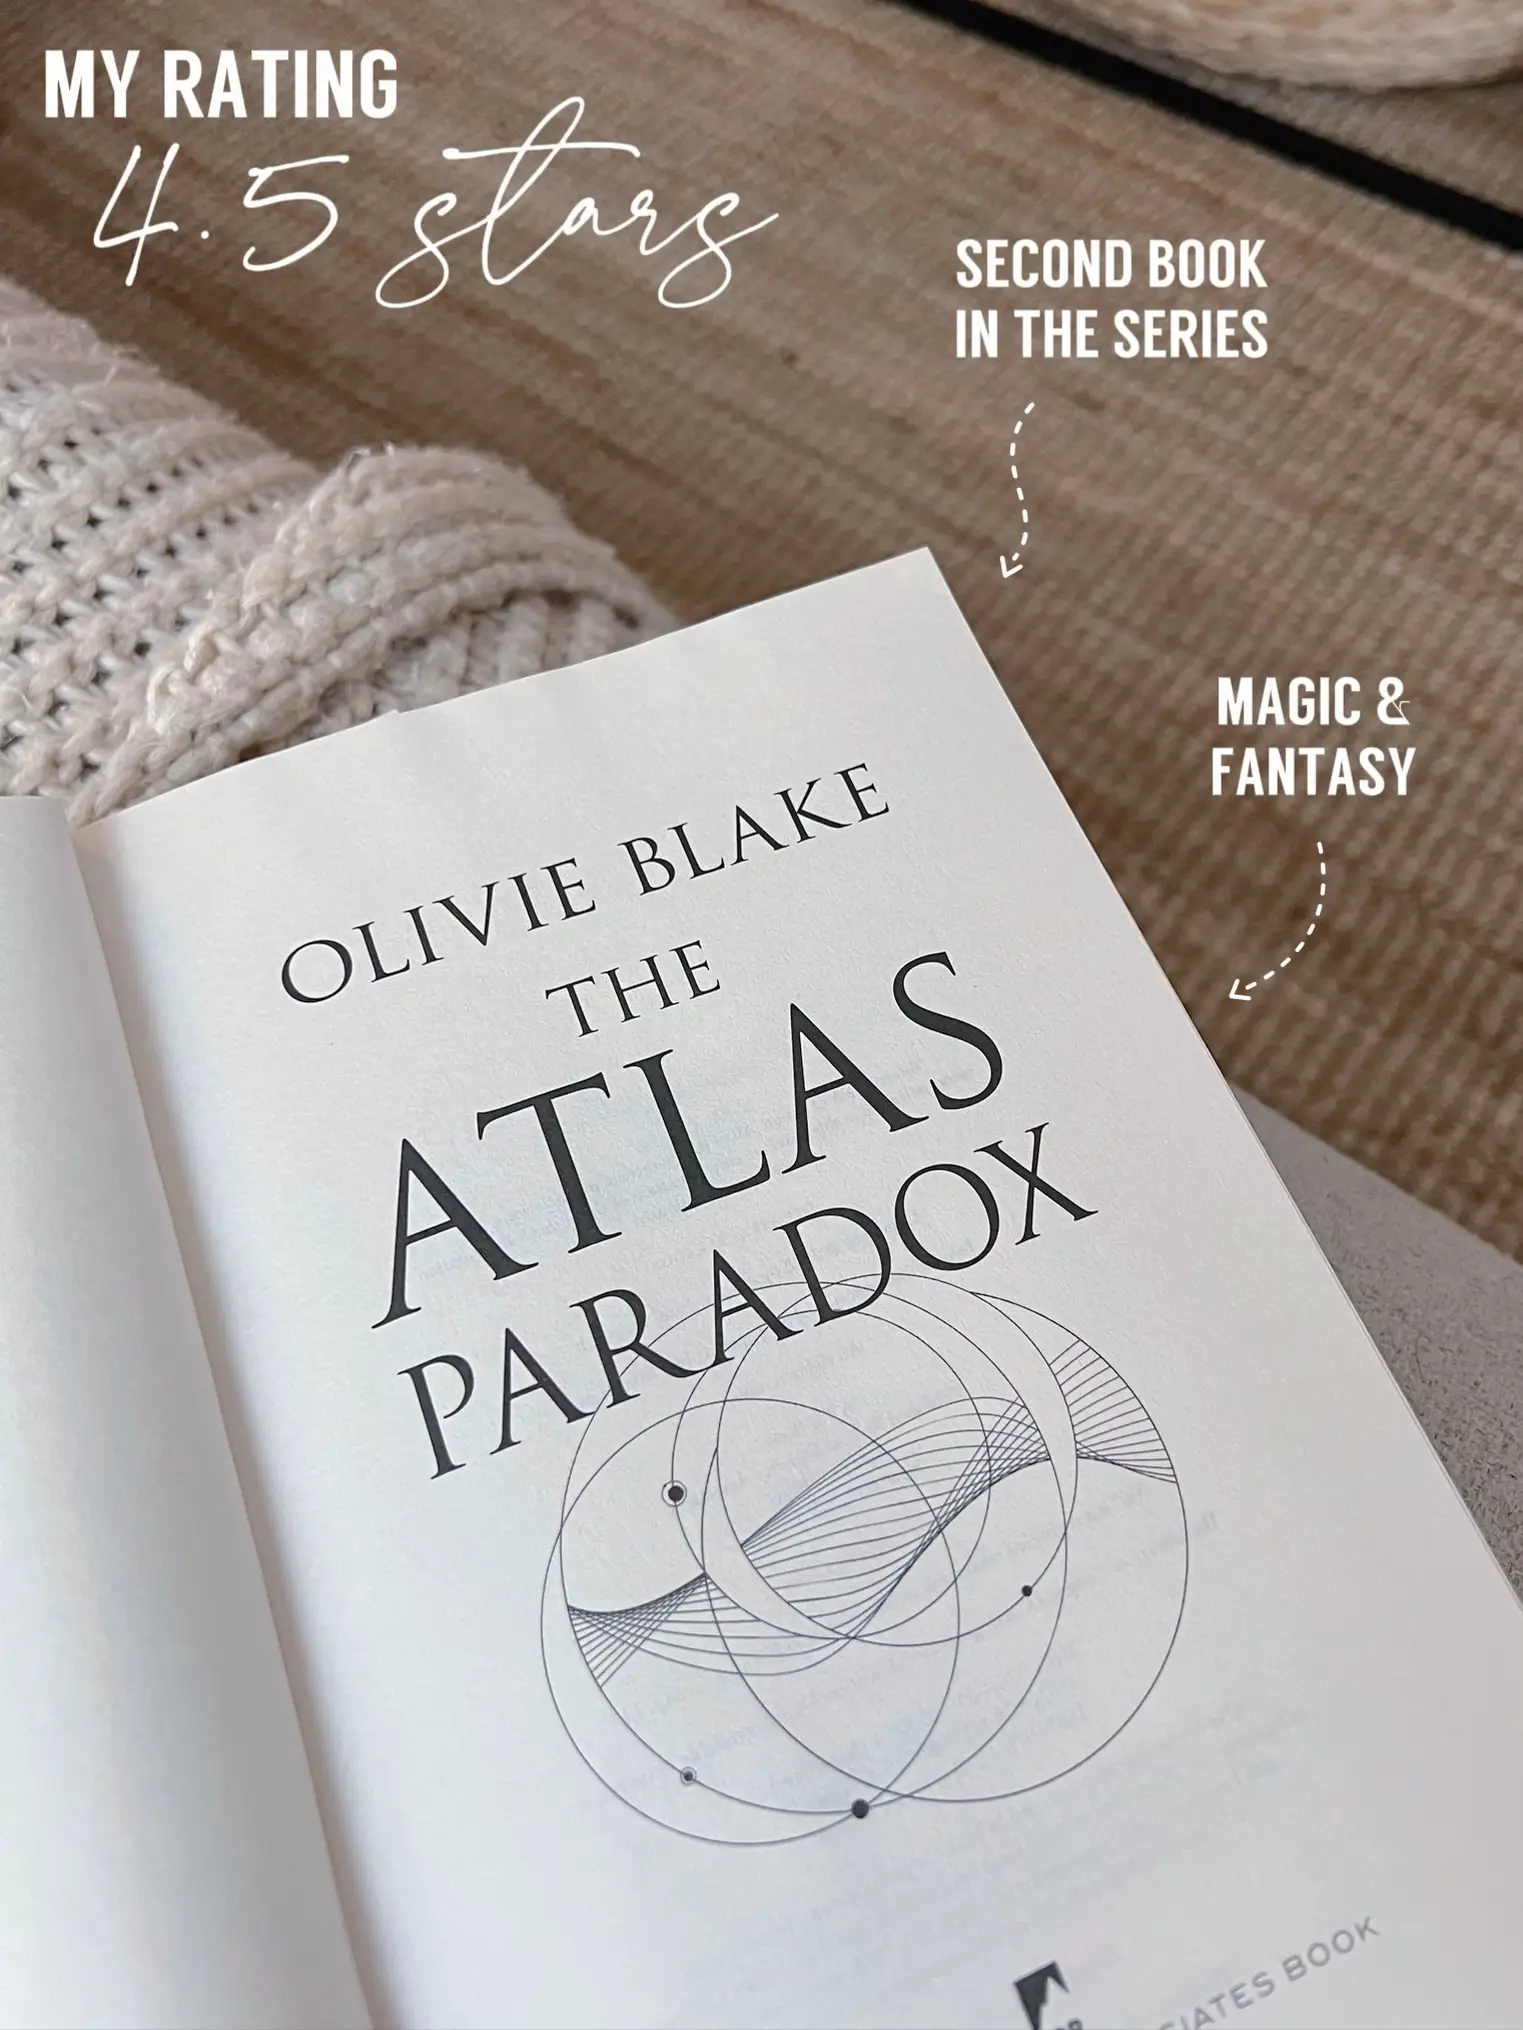 my olivie blake book ratings —, Gallery posted by emily 📖🌻